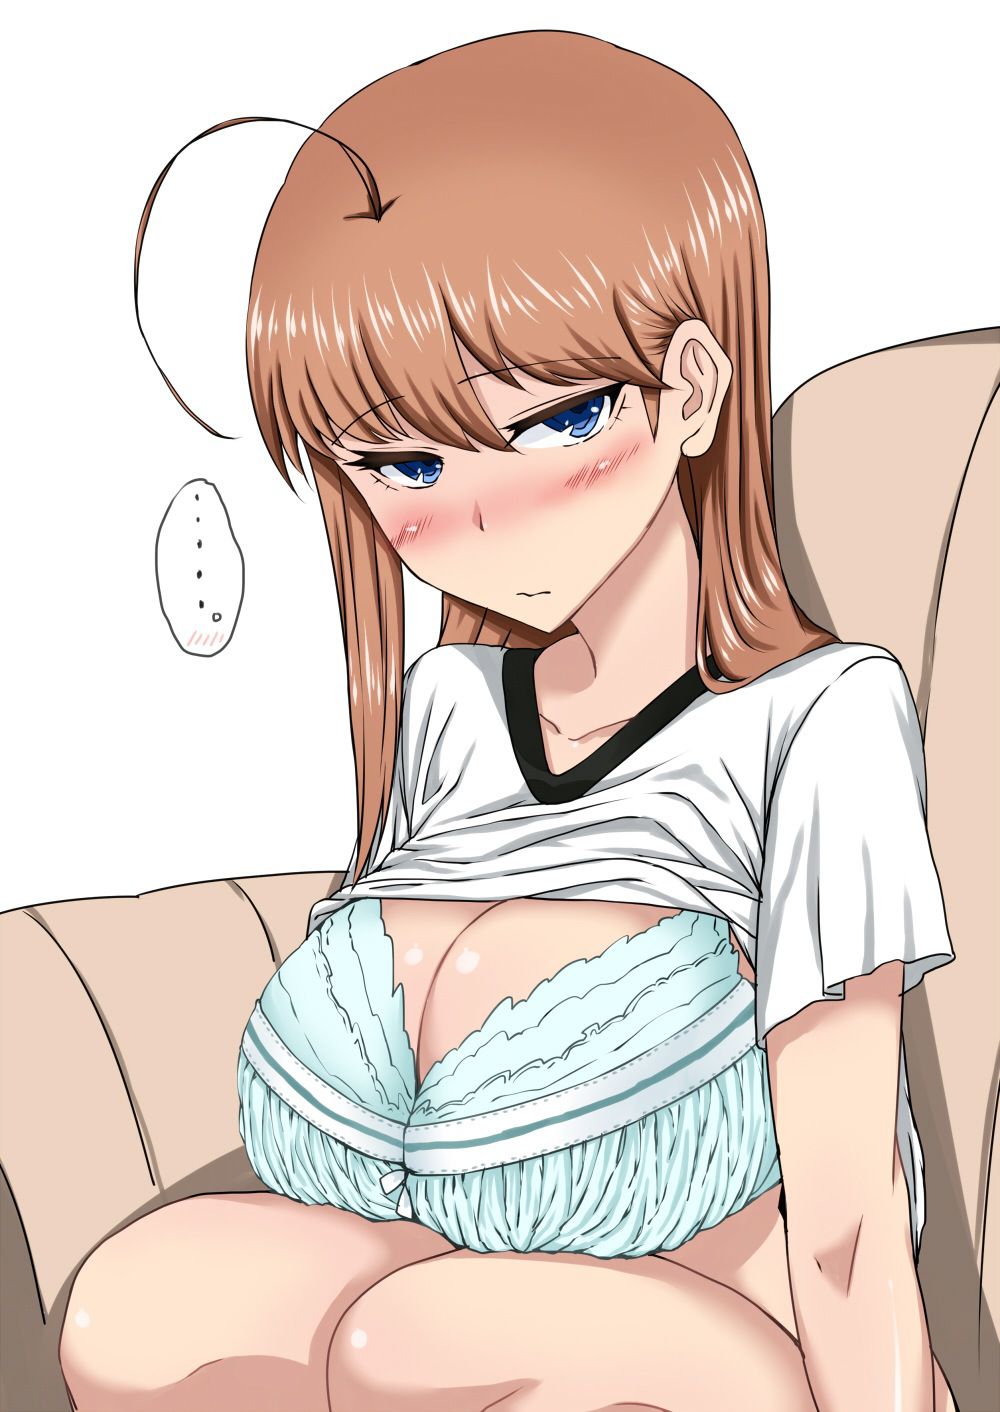 ELO's most exciting 2D underwear girl I noticed image summary 54 36